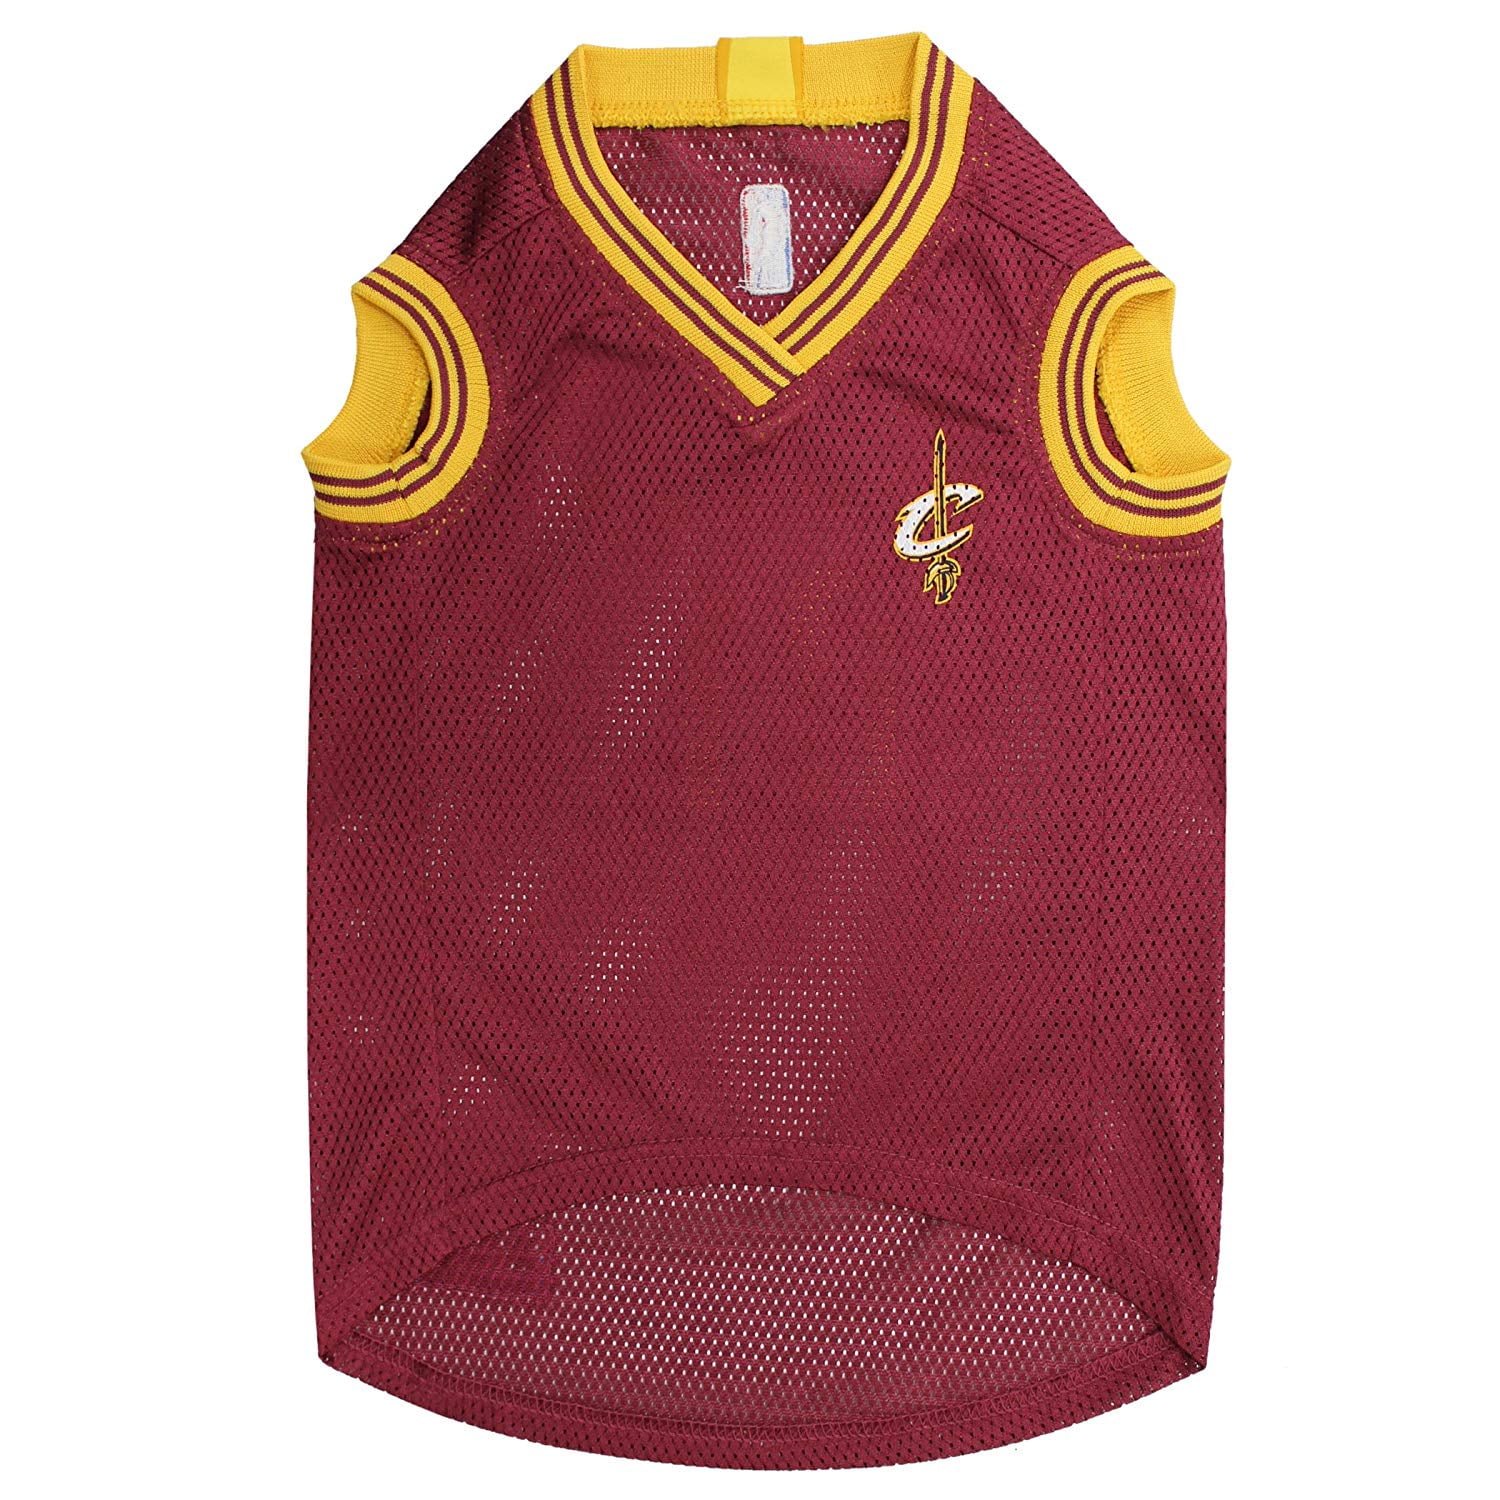 Cleveland Cavaliers Gold NBA Jerseys for sale